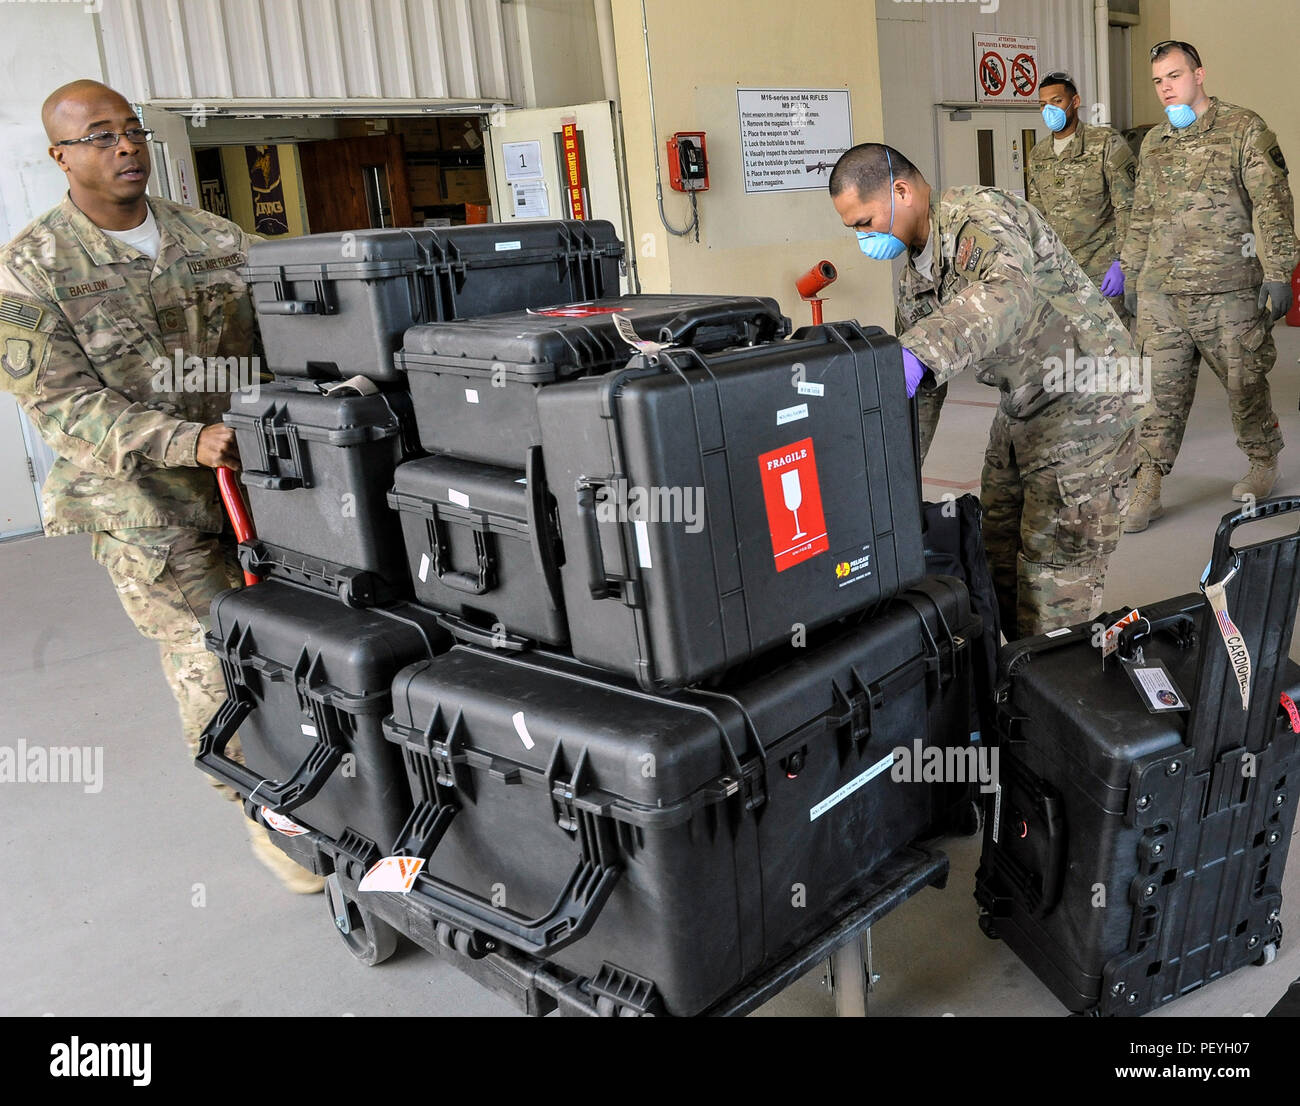 A 455th Expeditionary Medical Group team handles the Extracorporeal Membrane Oxygenation team’s equipment during a patient transfer at the Craig Joint-Theater Hospital at Bagram Air Field, Afghanistan, on Feb. 18, 2016. The ECMO team, dispatched from San Antonio Military Medical Center, uses technology that bypasses the lungs and infuses the blood directly with oxygen, while removing the harmful carbon dioxide from the blood stream. The patient was airlifted to Landstuhl Regional Medical Center, Germany, where he will receive 7 to 14 days of additional ECMO treatment. (U.S. Air Force photo by  Stock Photo